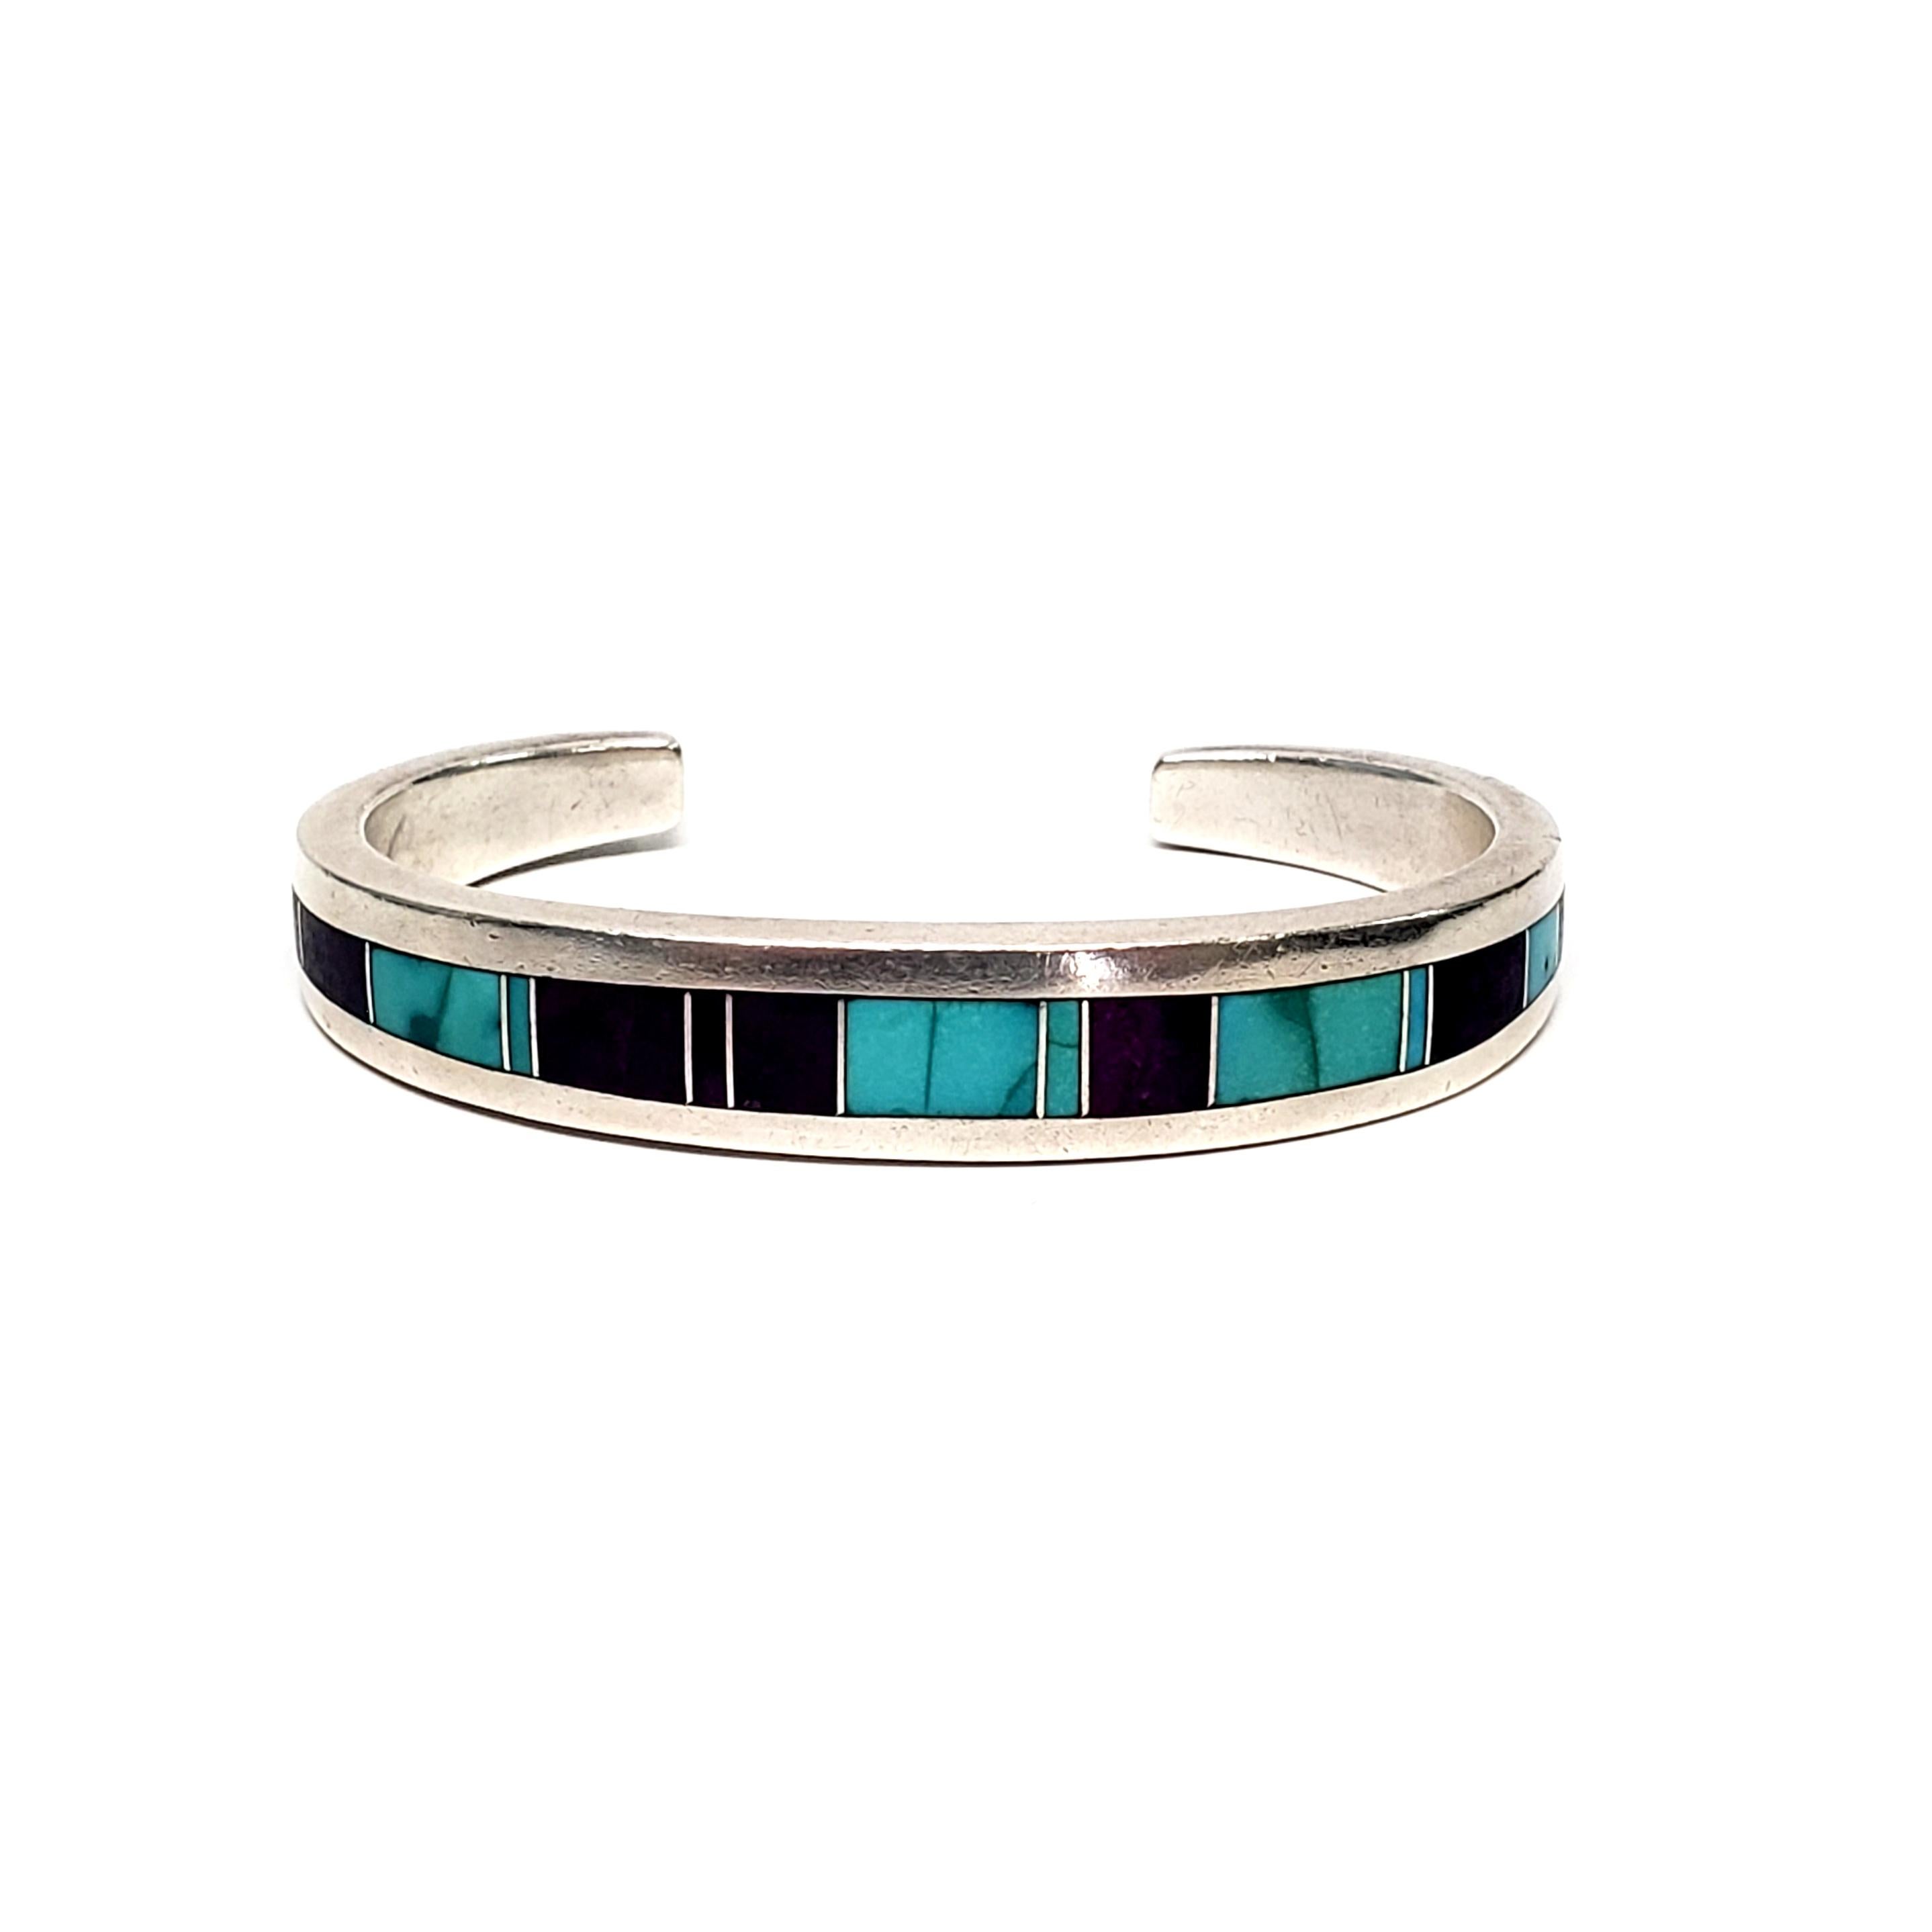 Native American Ray Tracey Sterling Silver Inlaid Turquoise and Suglite Cuff Bracelet